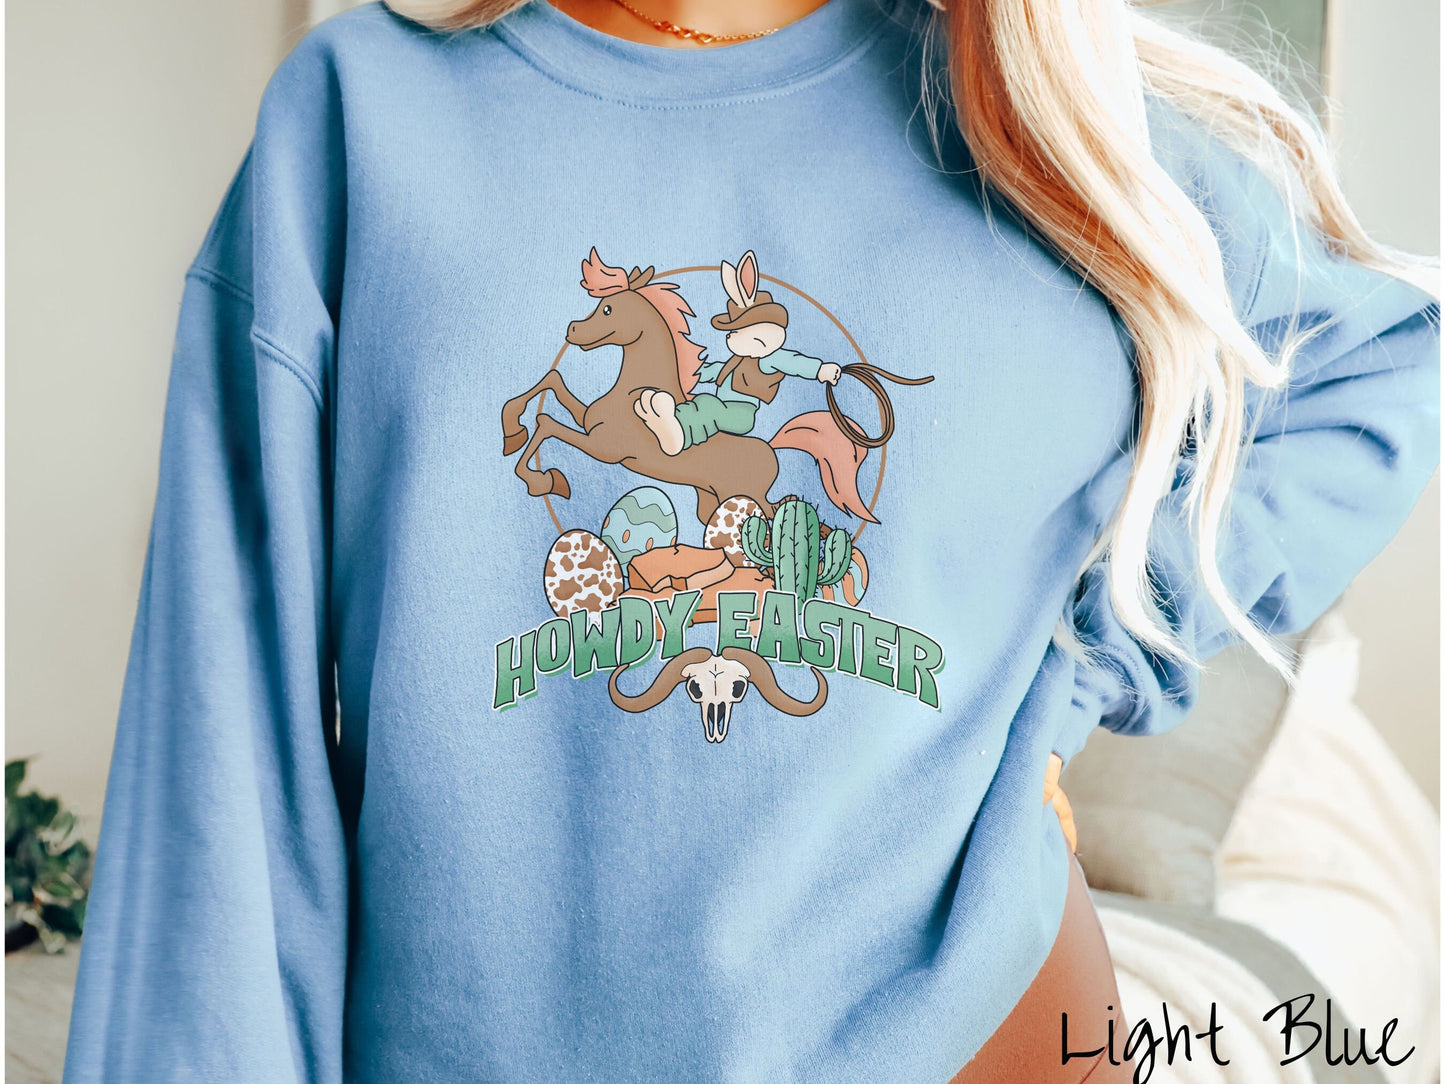 A woman wearing a cute, vintage light blue colored sweatshirt with a cowboy rabbit riding a bucking, brown horse while holding a lasso rope. Below is green text Howdy Easter along with colorful Easter eggs, a green cactus, and a horned bull skull.